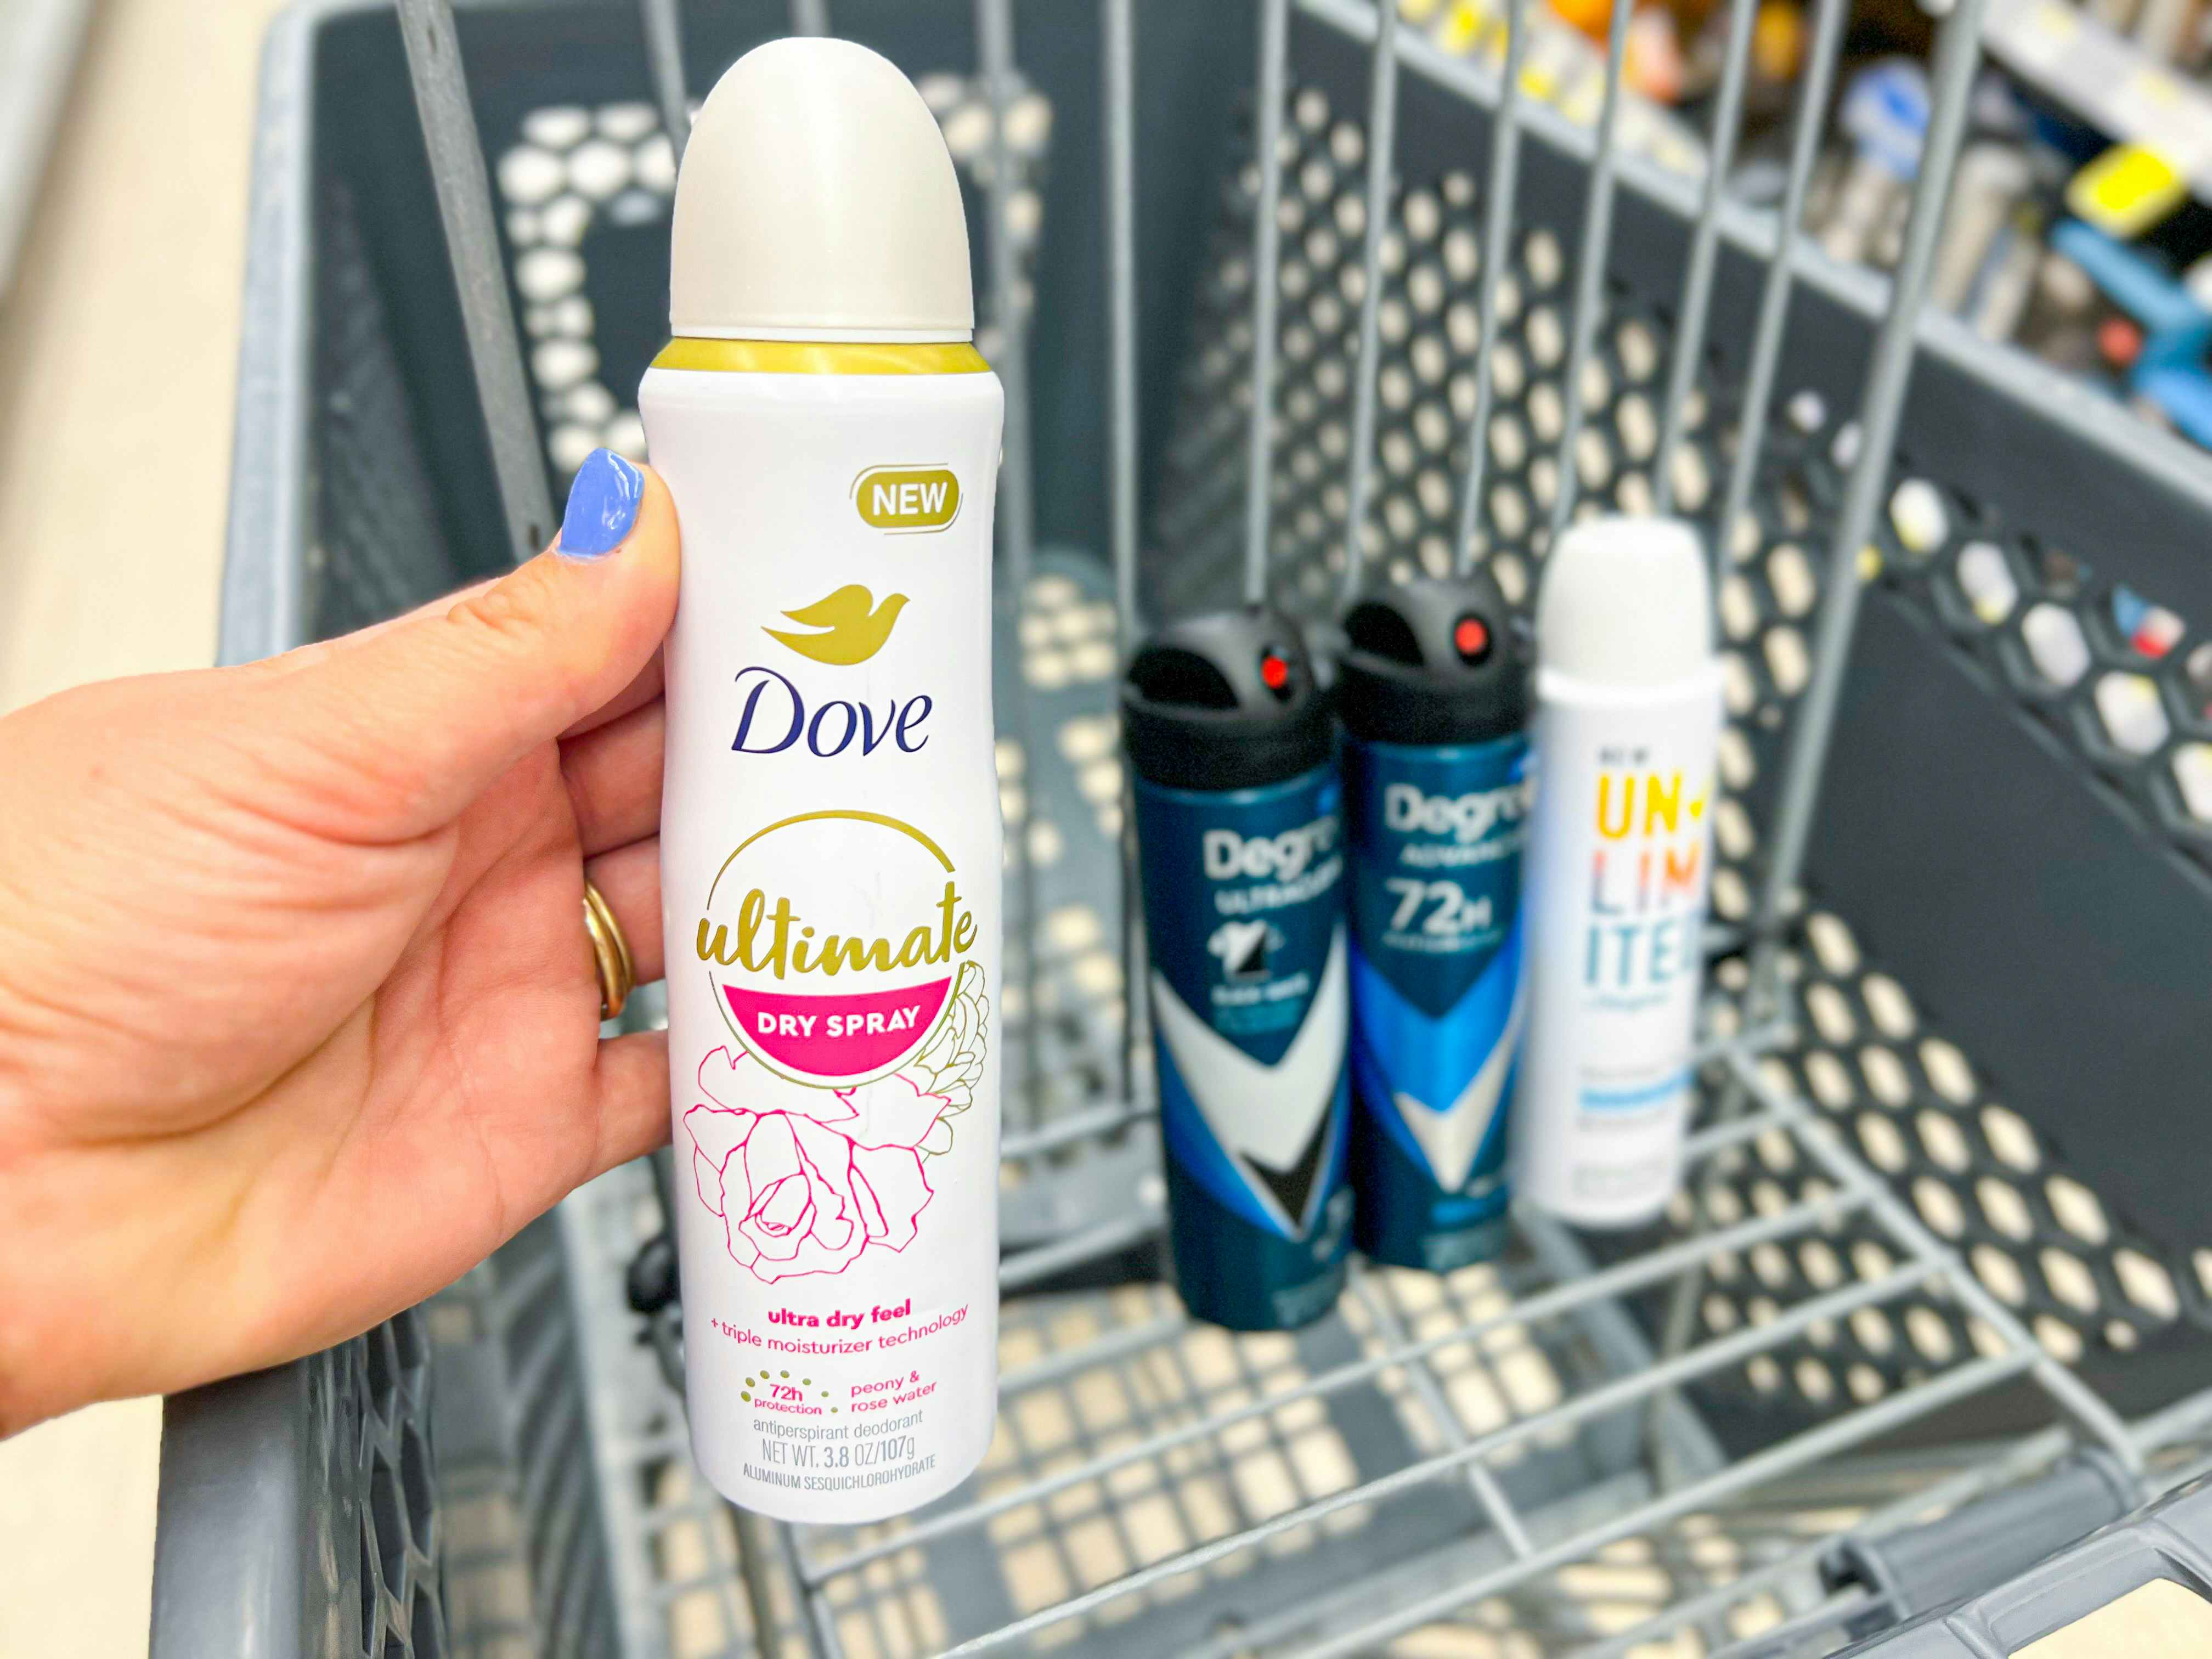 dove and degree dry spray deodorant in a cart